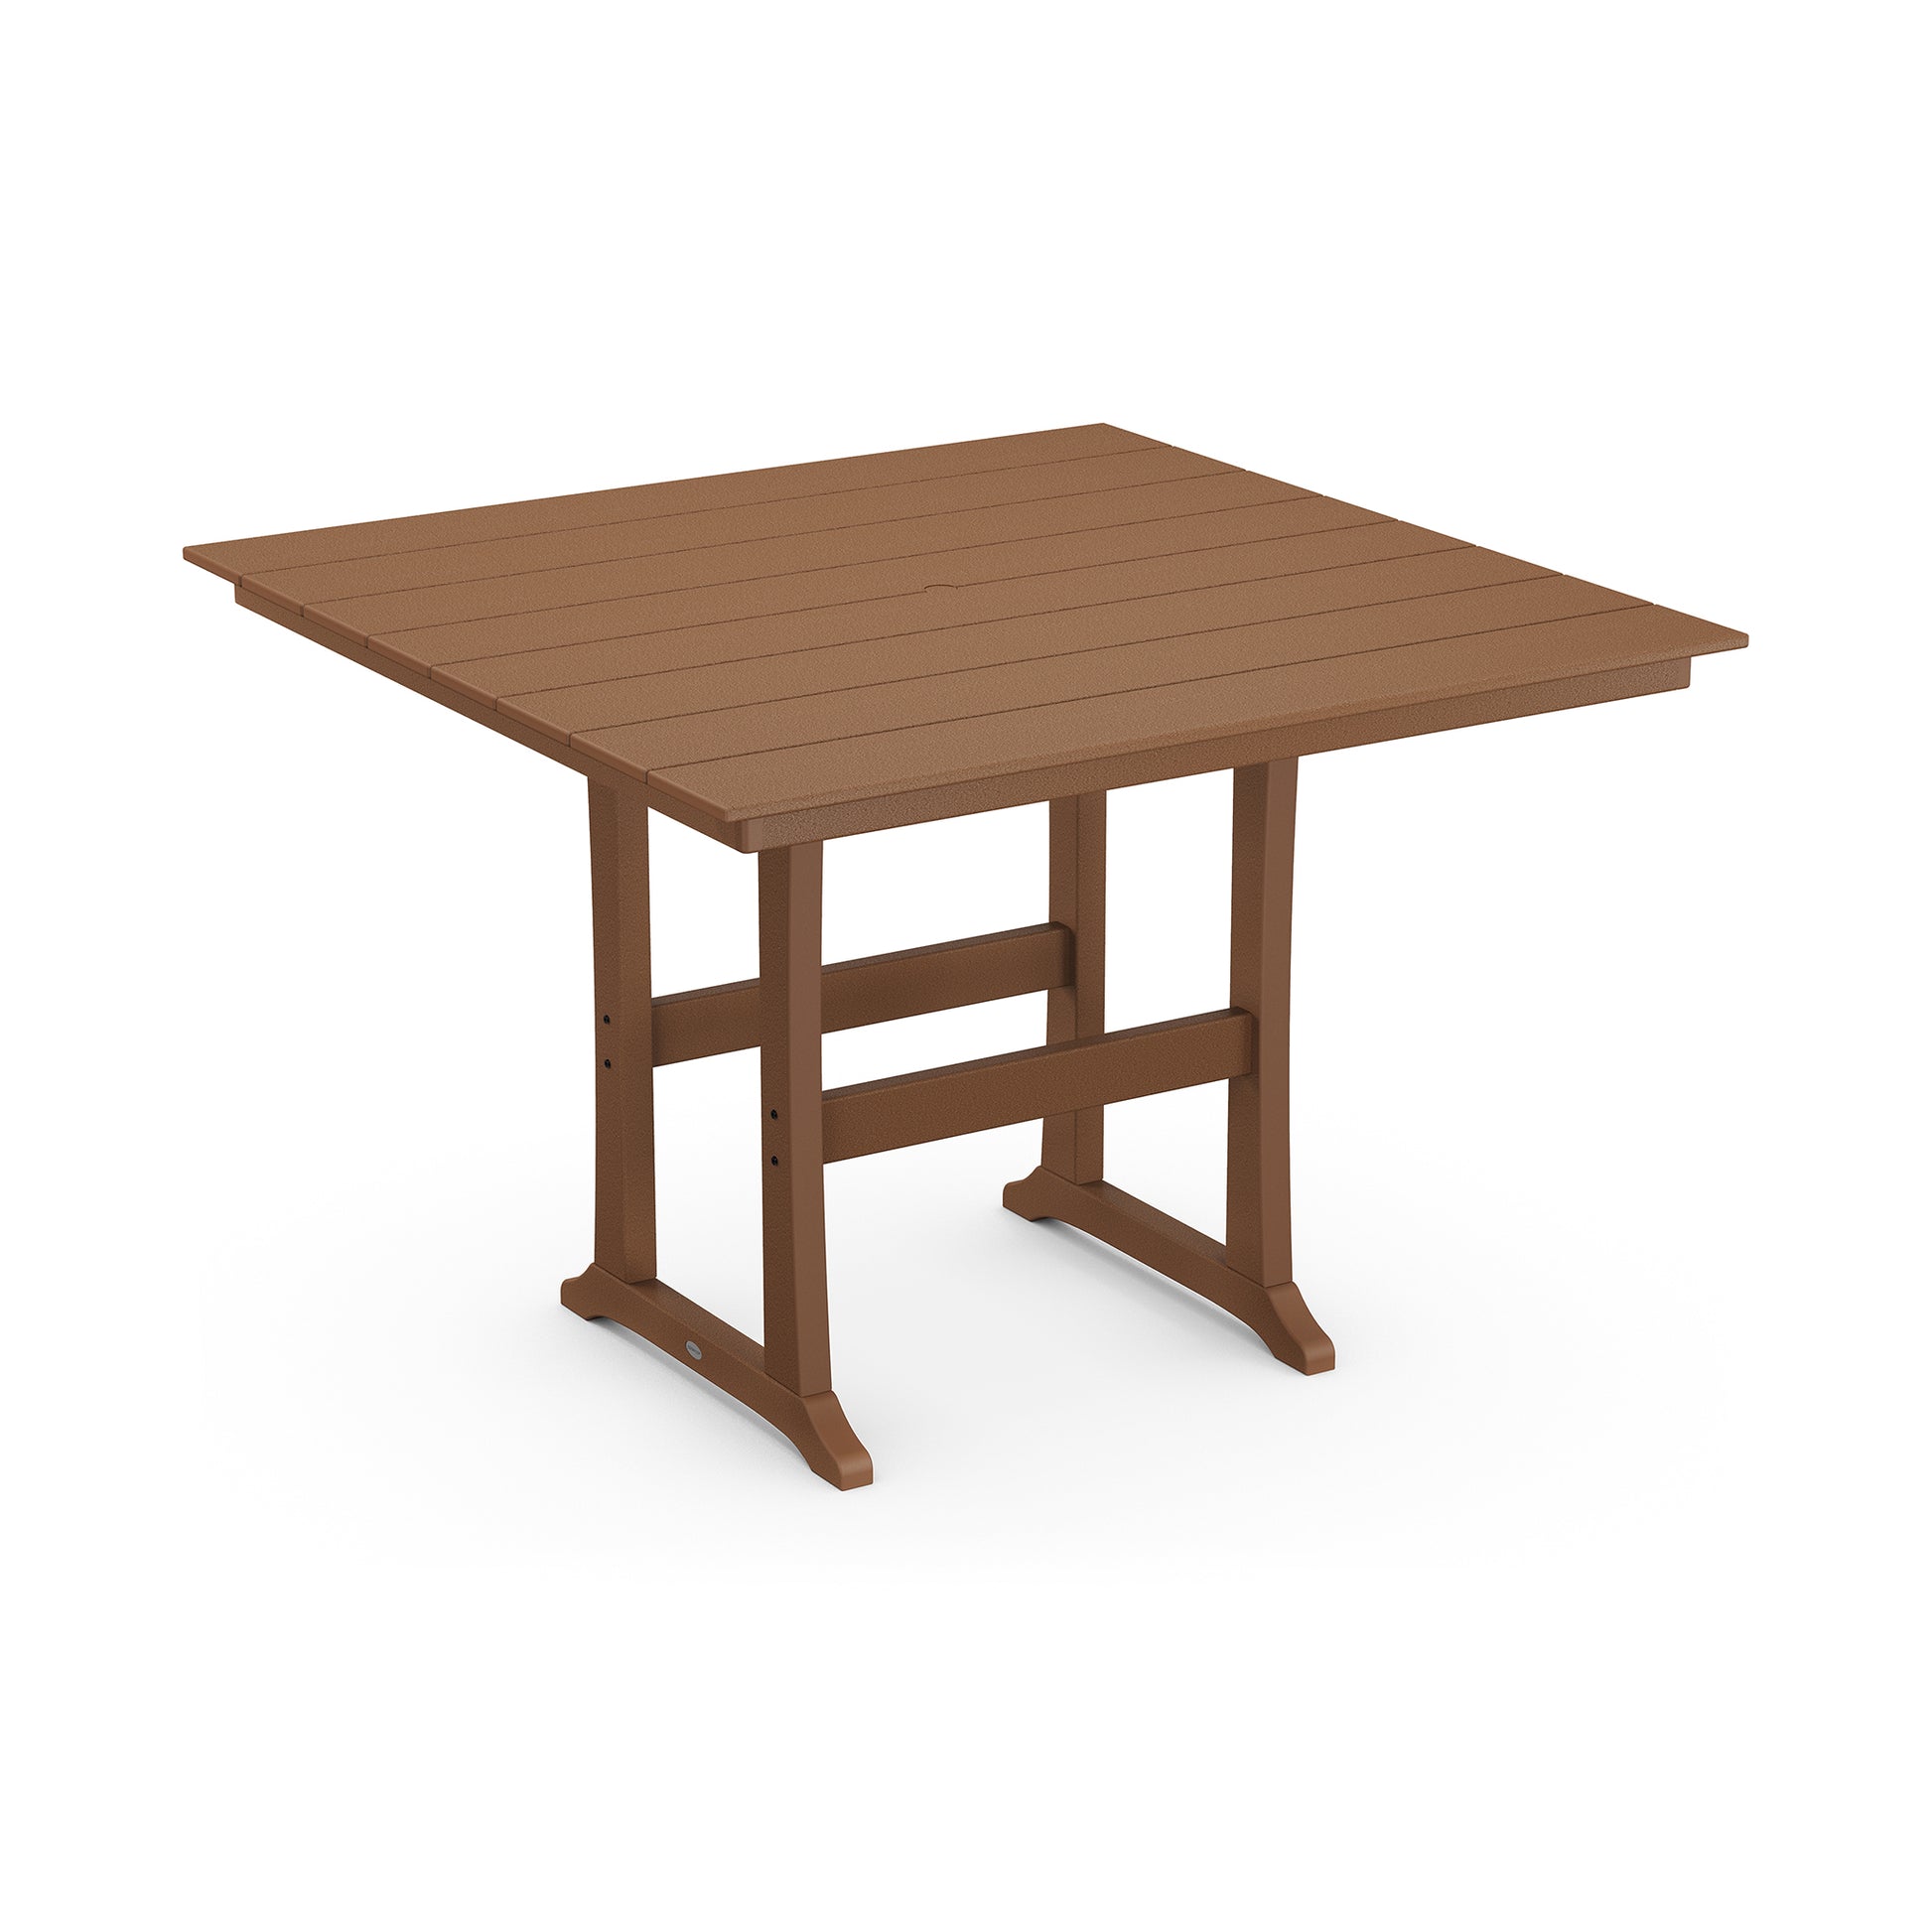 A 3D rendering of a simple brown POLYWOOD Farmhouse Trestle 59" Bar Table with a rectangular top and sturdy legs, set against a plain white background.